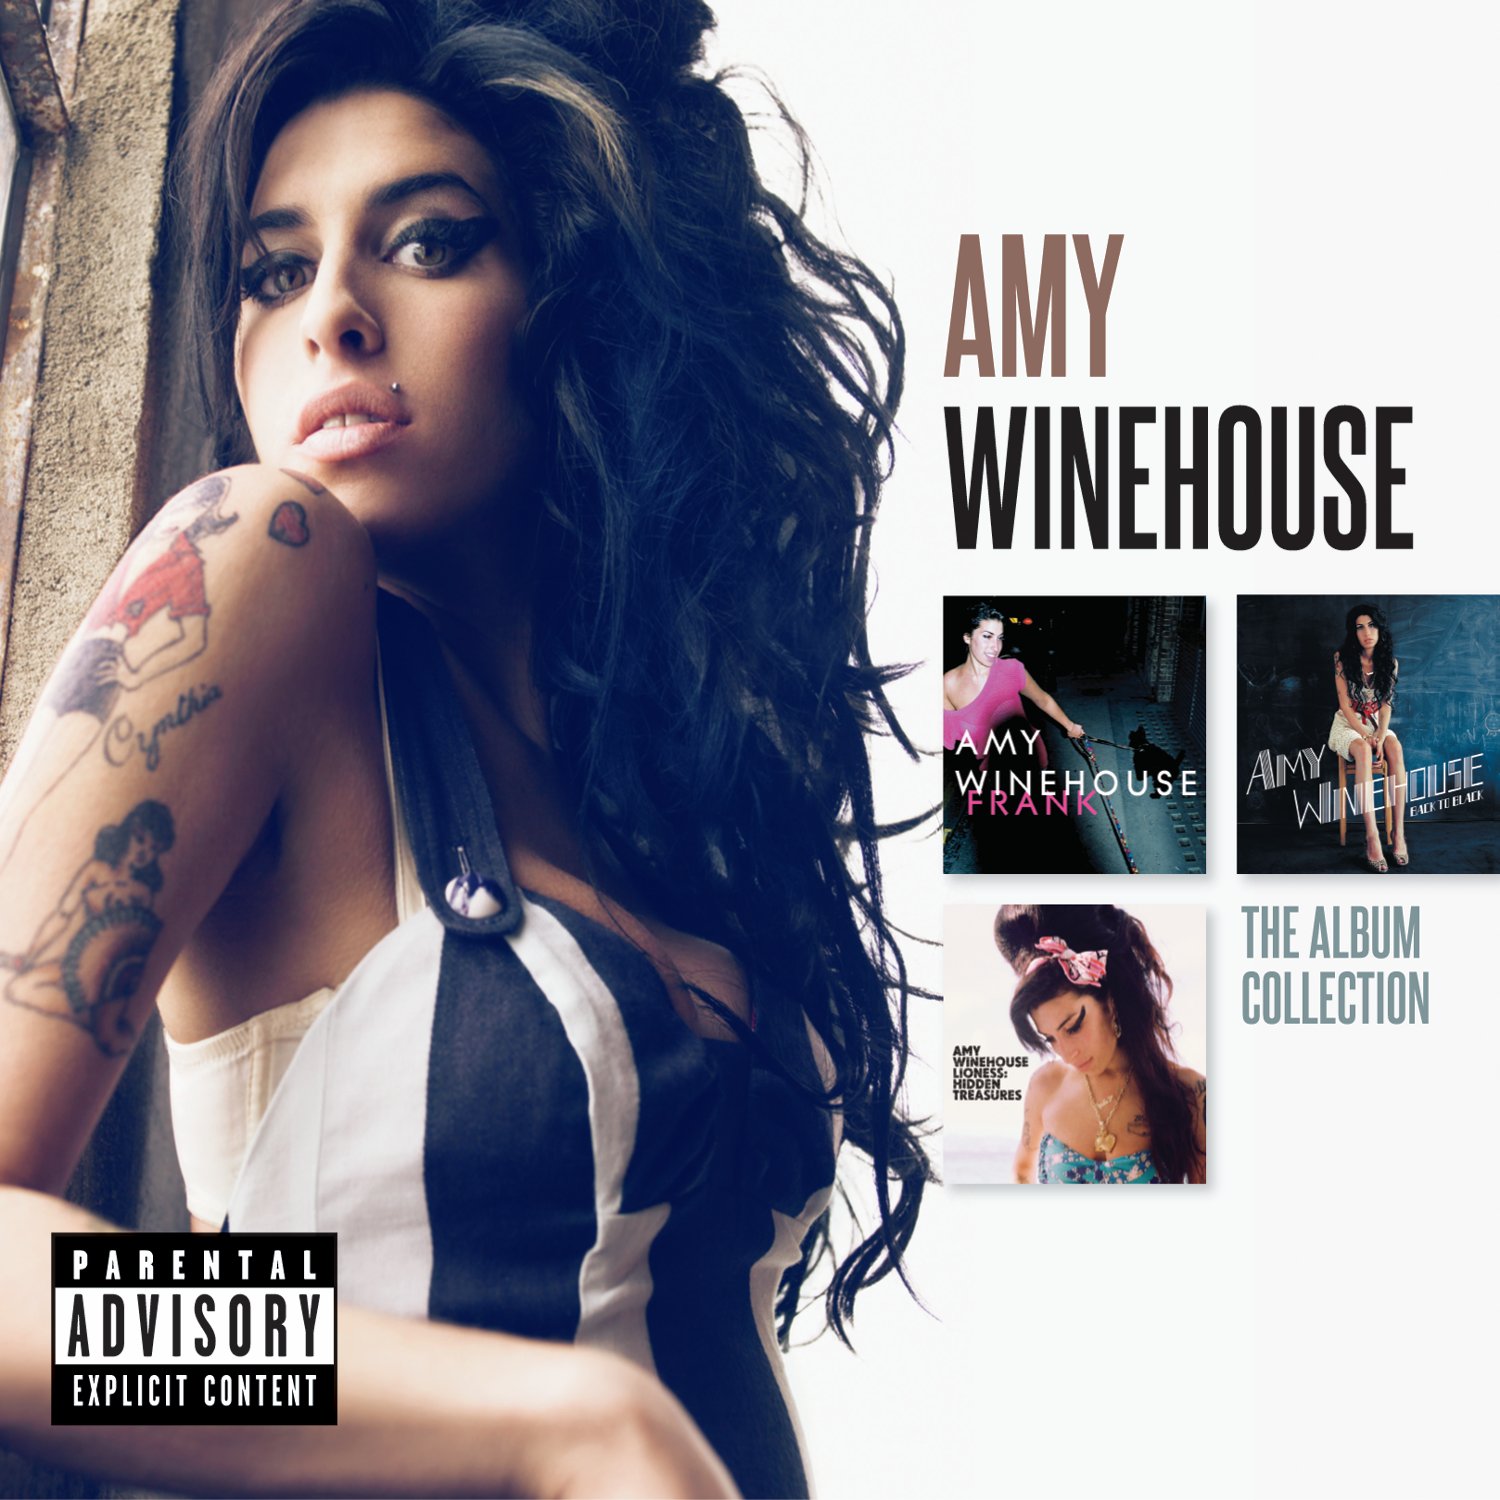 Amy-Winehouse-The-Album-Collection-L6025